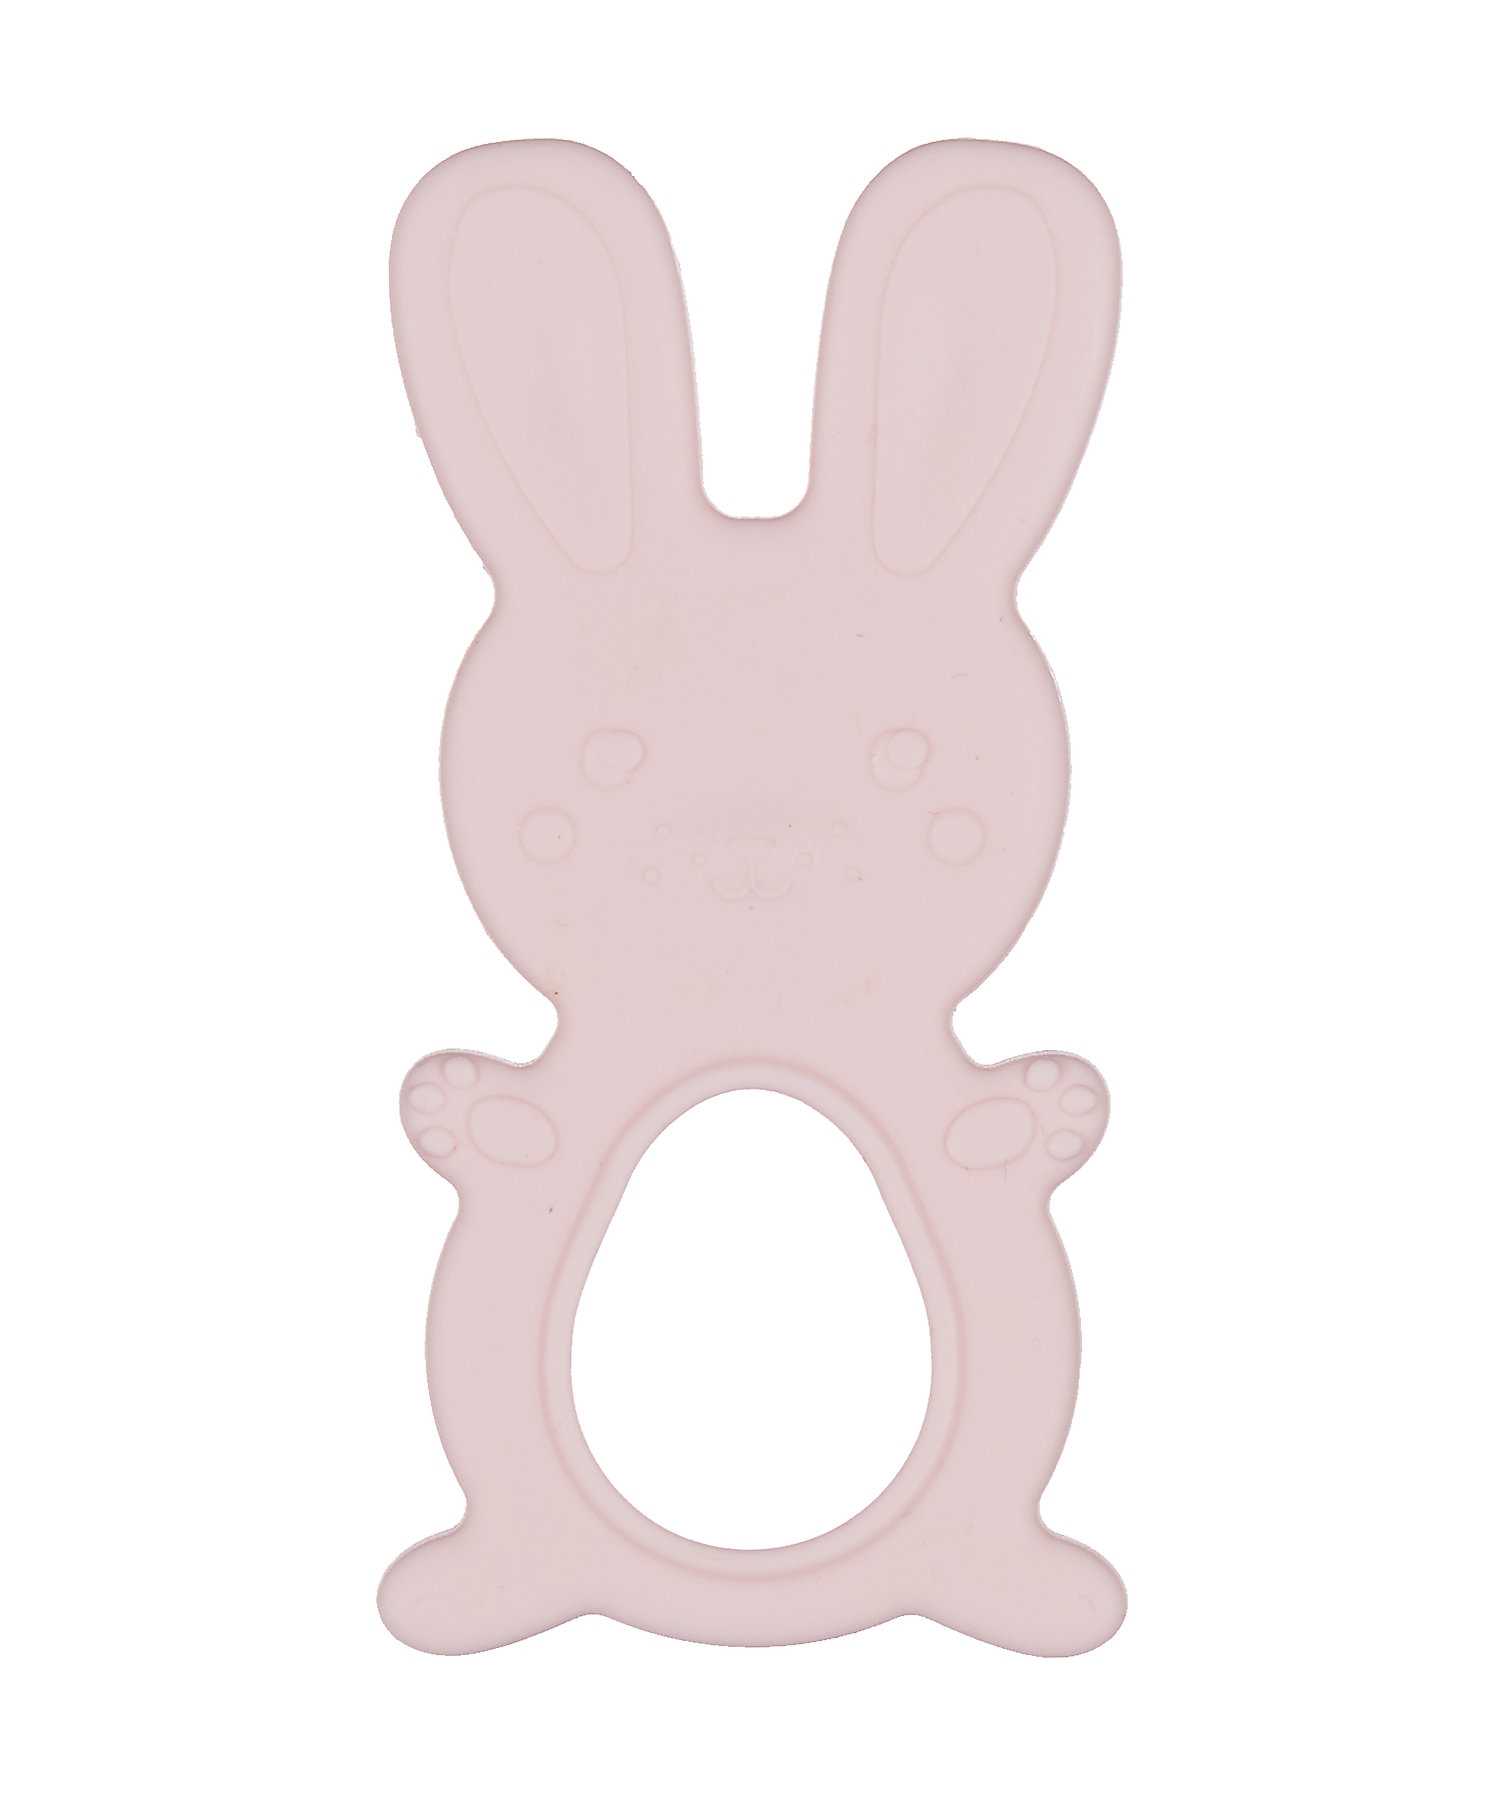 Mothercare | Mothercare Rabbit Silicone Teether 0